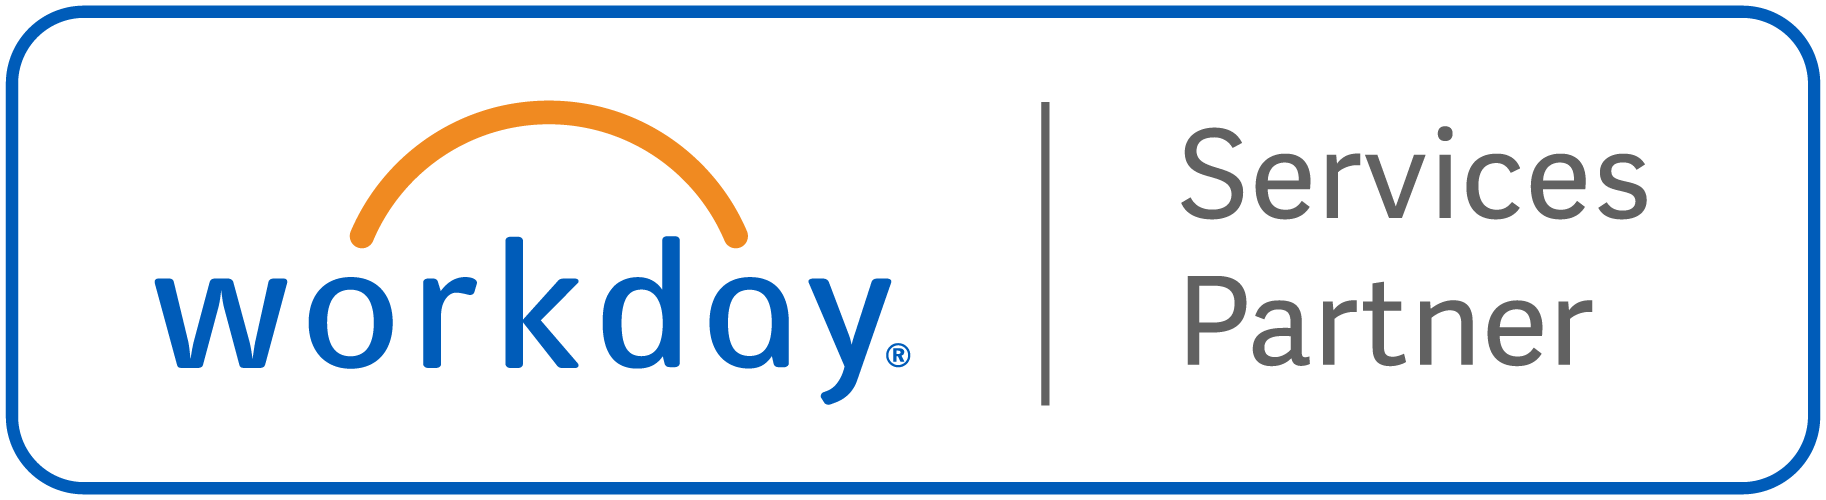 Workday Services Partners Logo